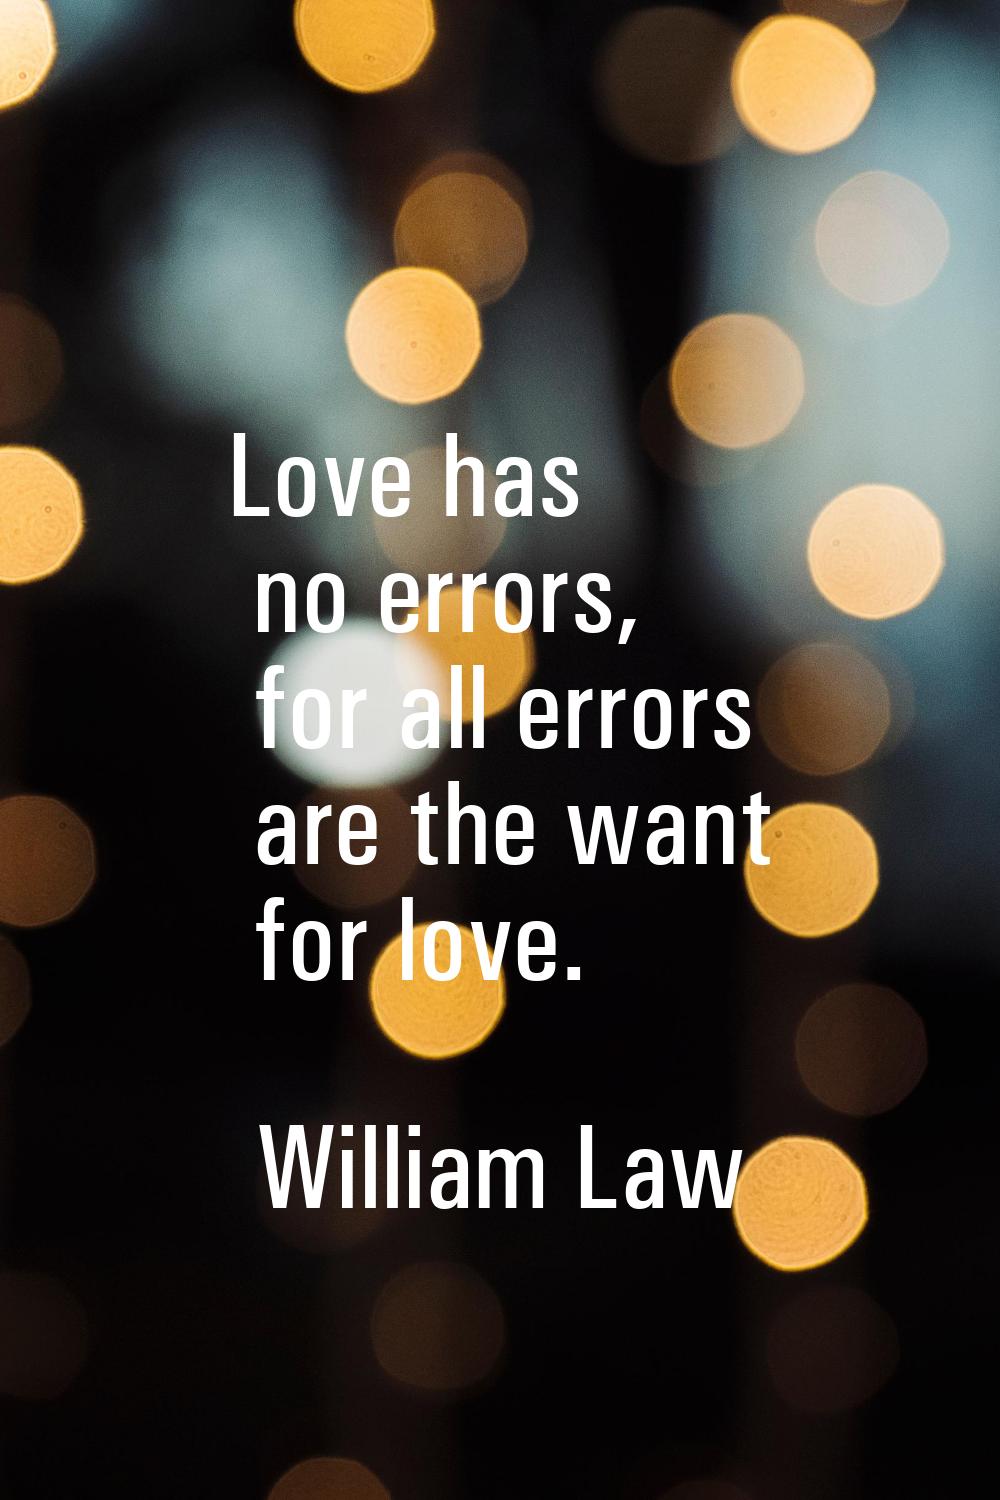 Love has no errors, for all errors are the want for love.